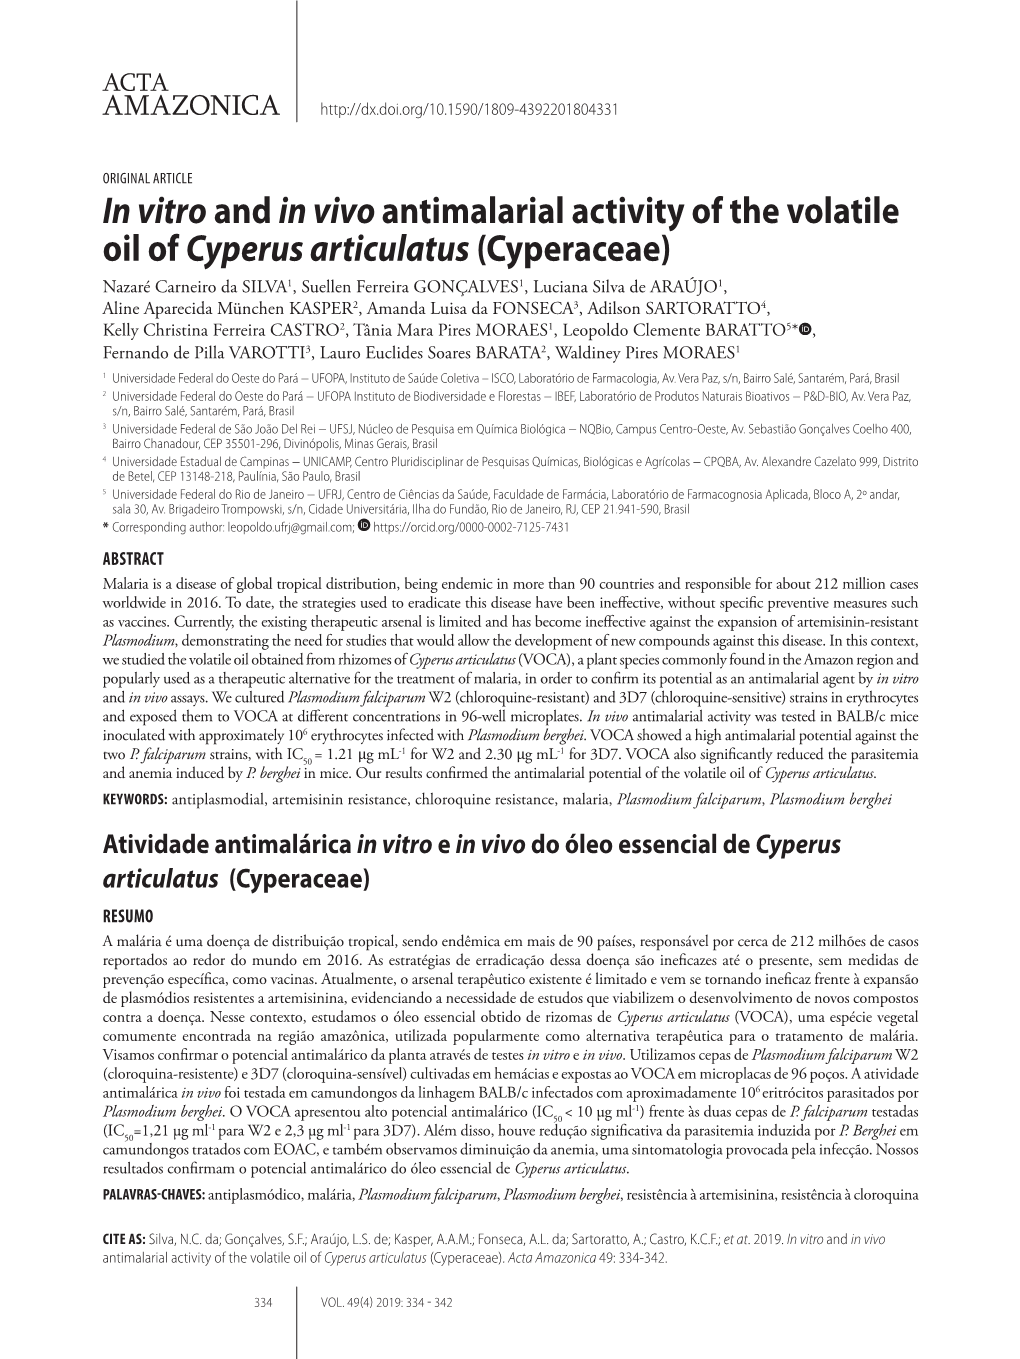 In Vitroand in Vivo Antimalarial Activity of the Volatile Oil of Cyperus